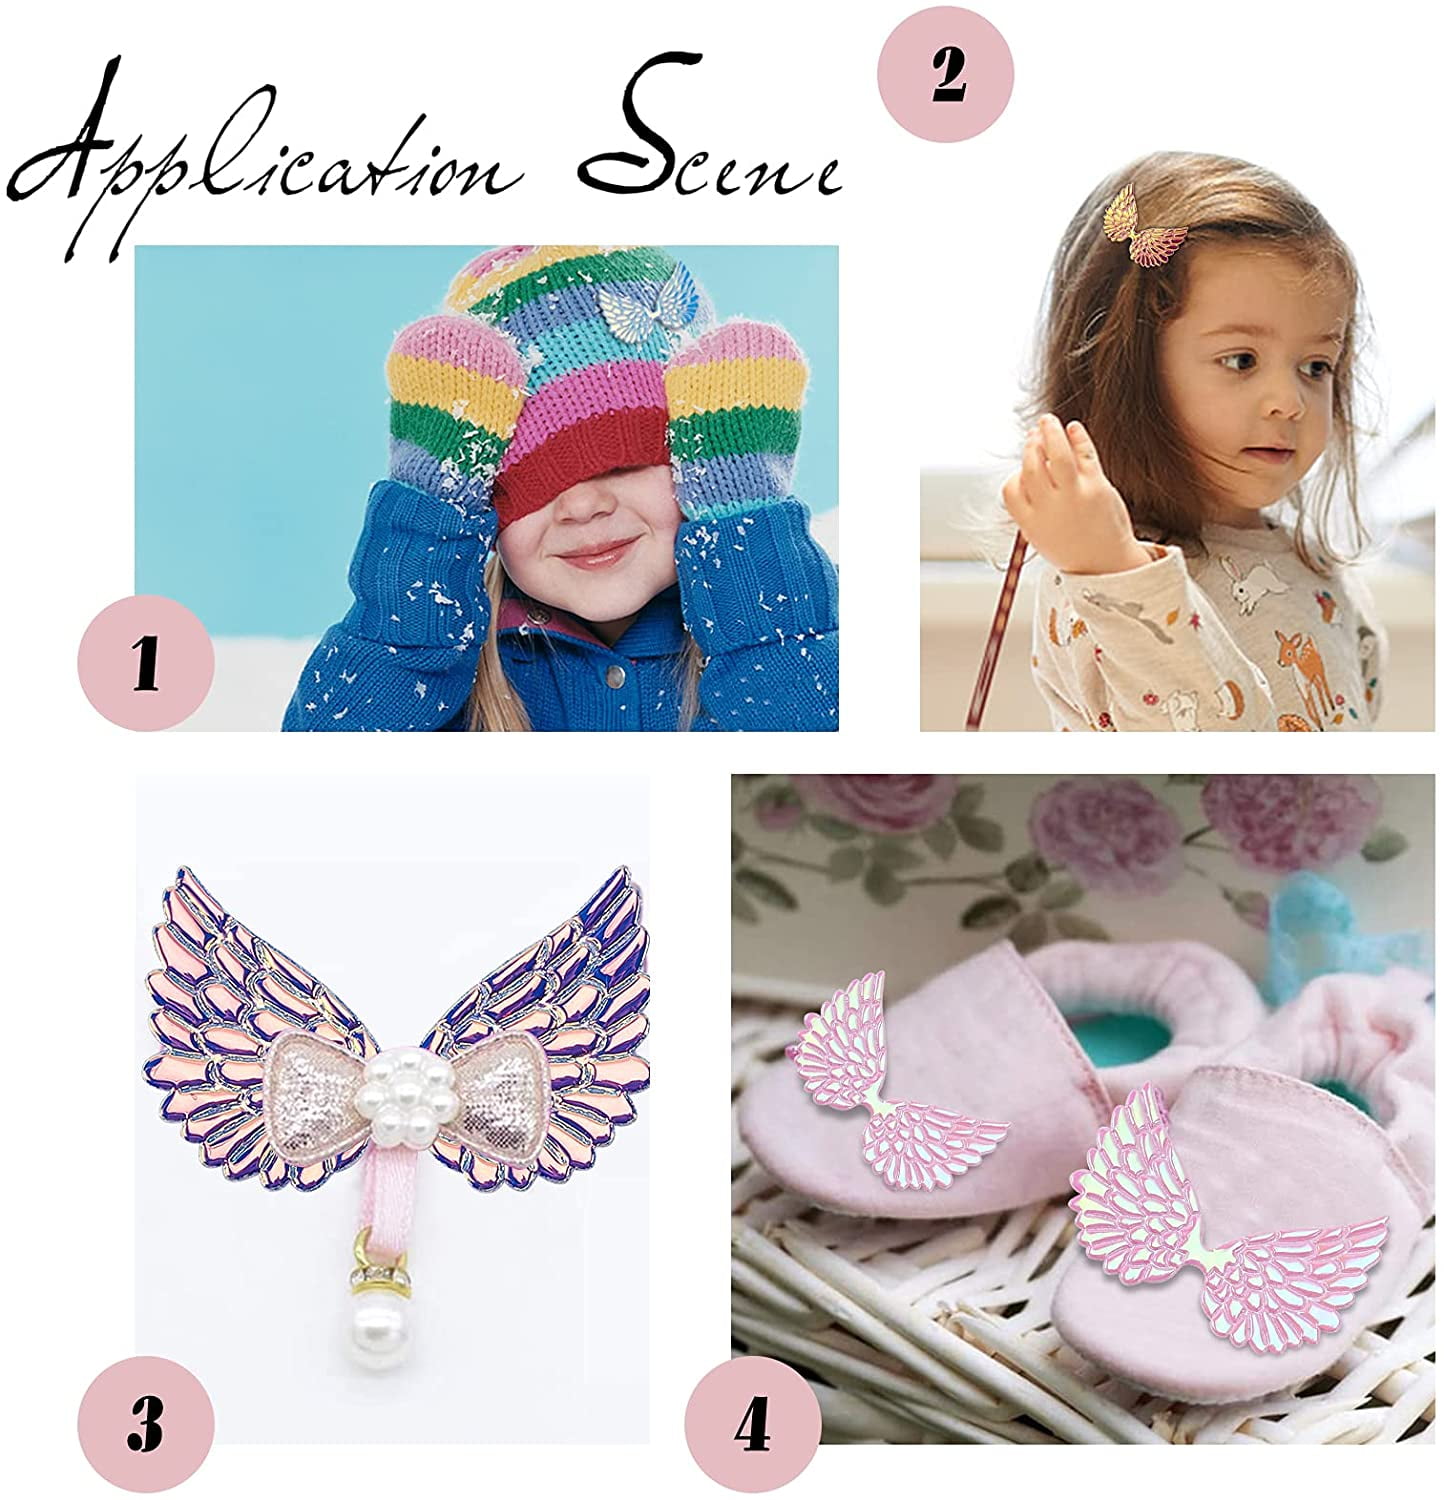 Abaodam 18pcs Angel Wings Accessories Angel Wing Ornament Bat Stickers  Wings Patches DIY Accessary Wing DIY Crafts Wing Iron on Patch Fabric Wings